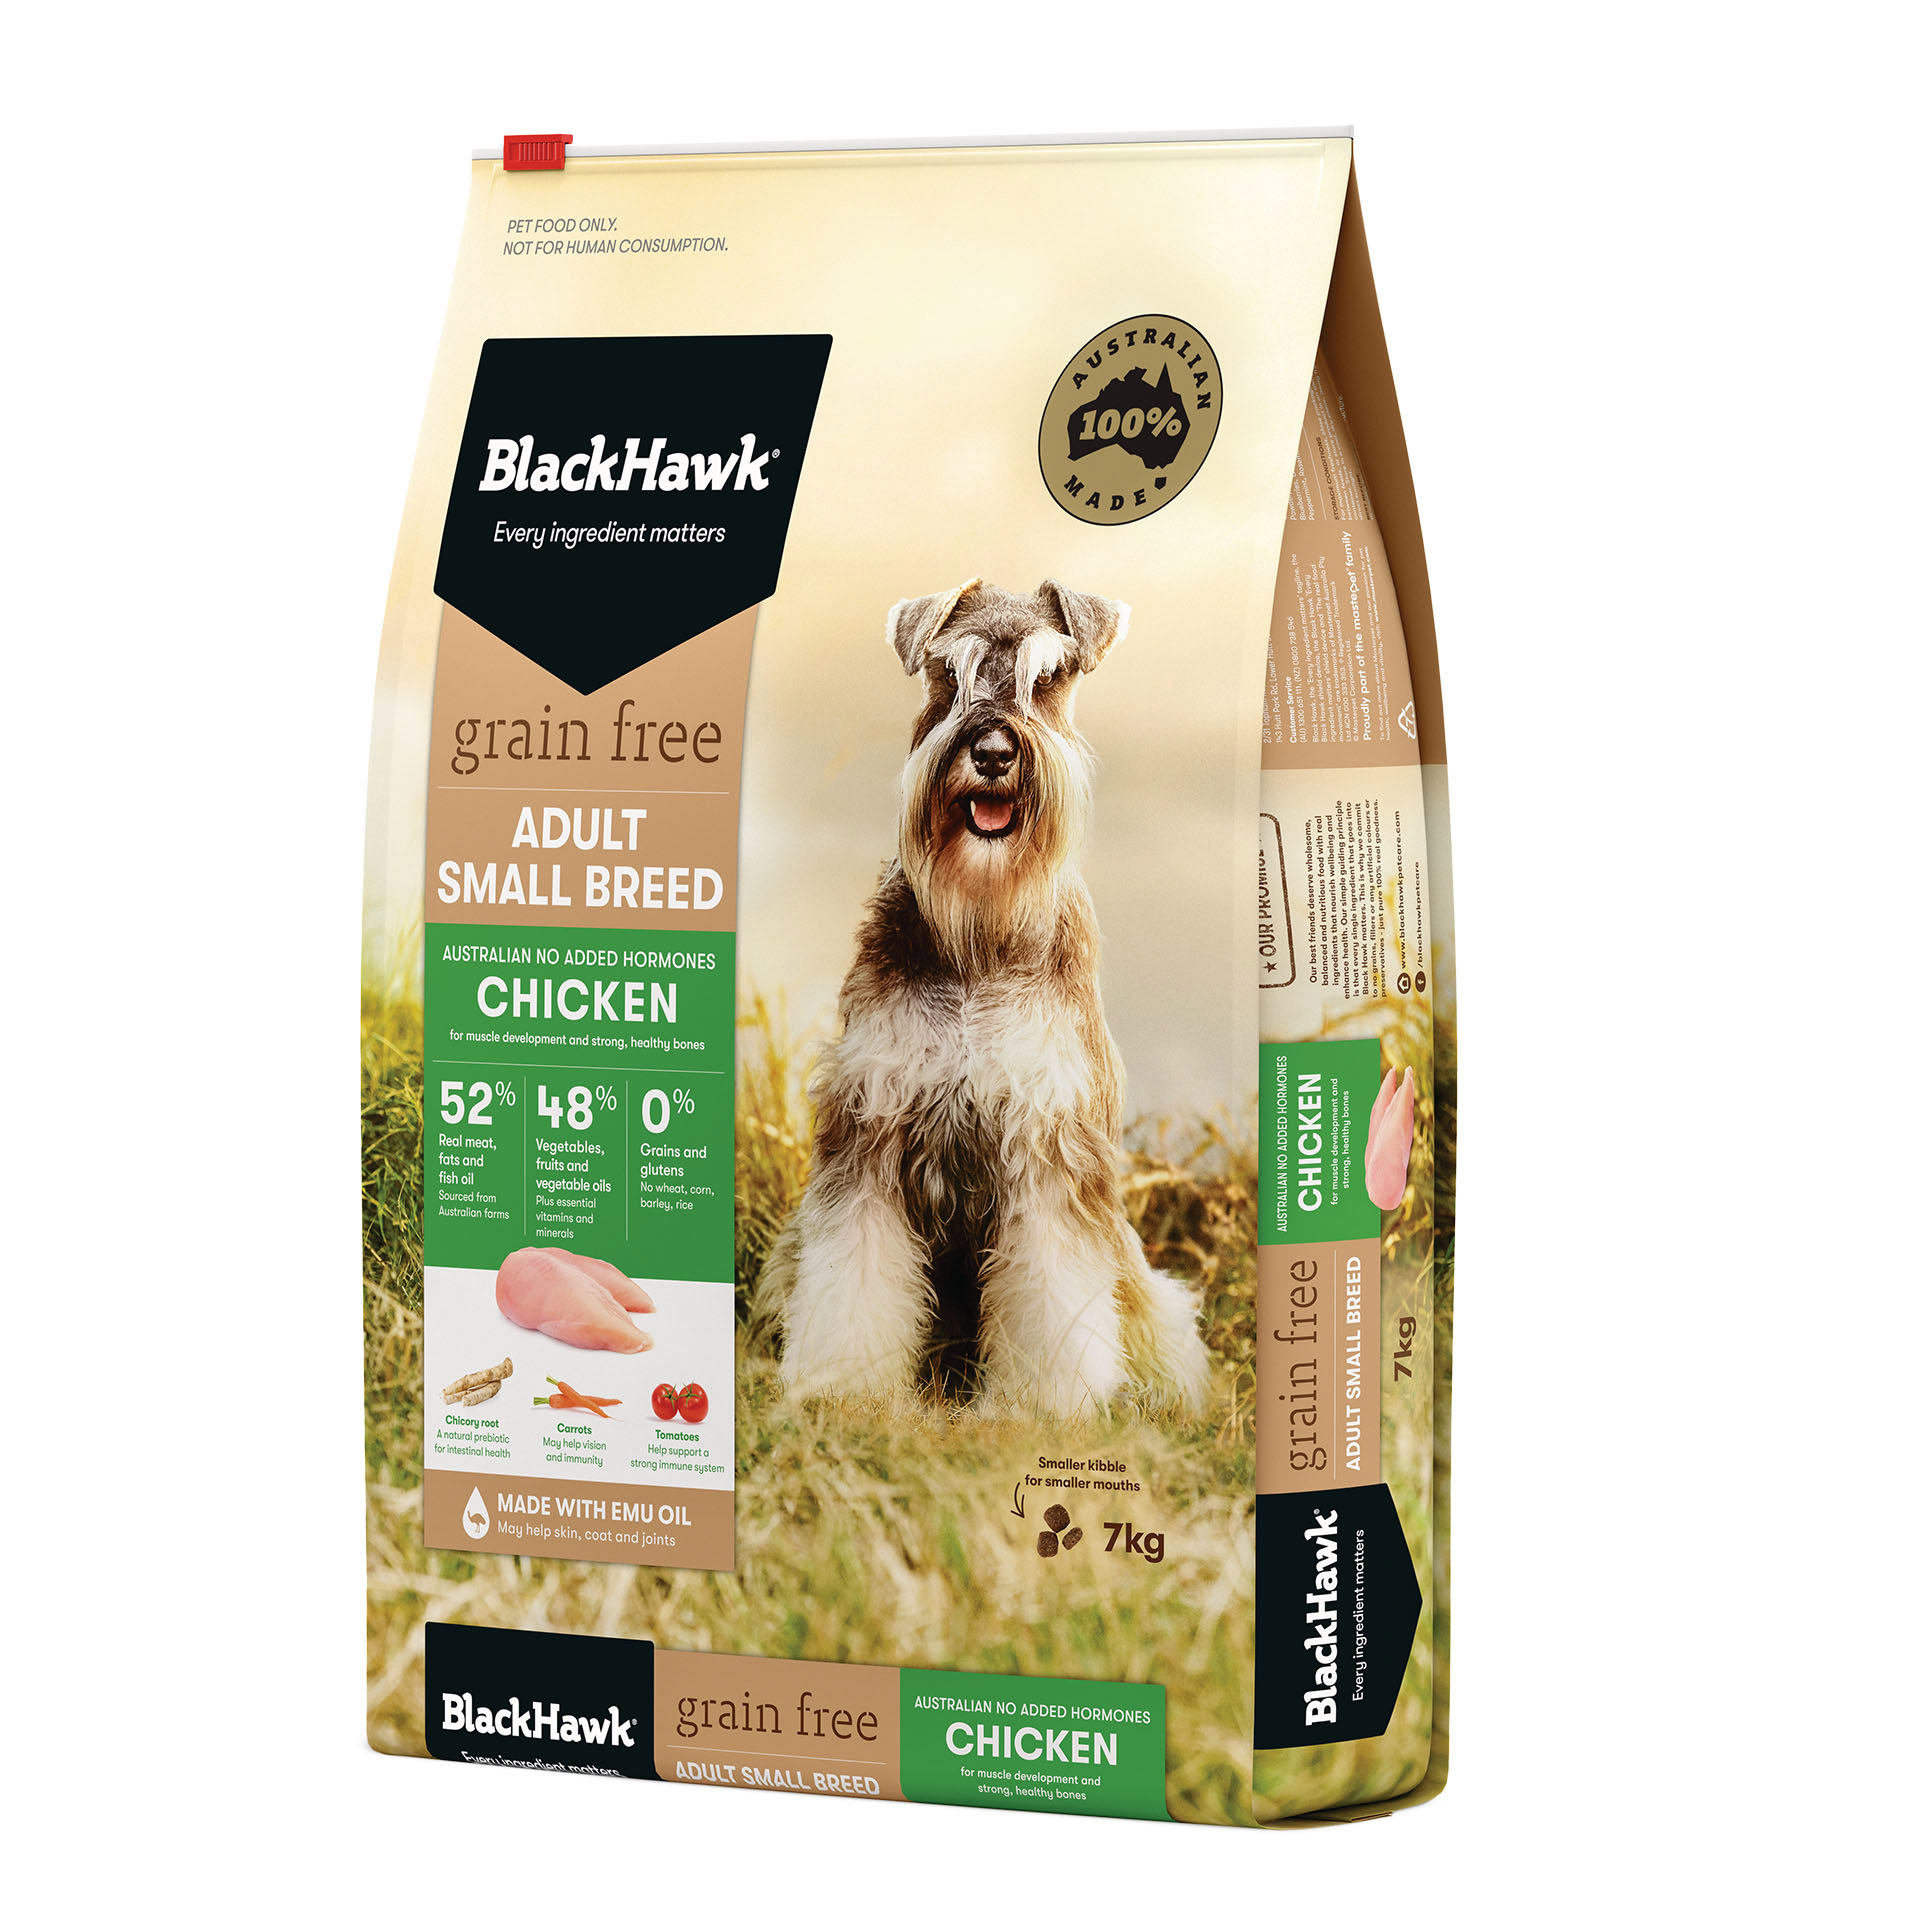 Grain Free Dog Food for Small Breeds - Chicken